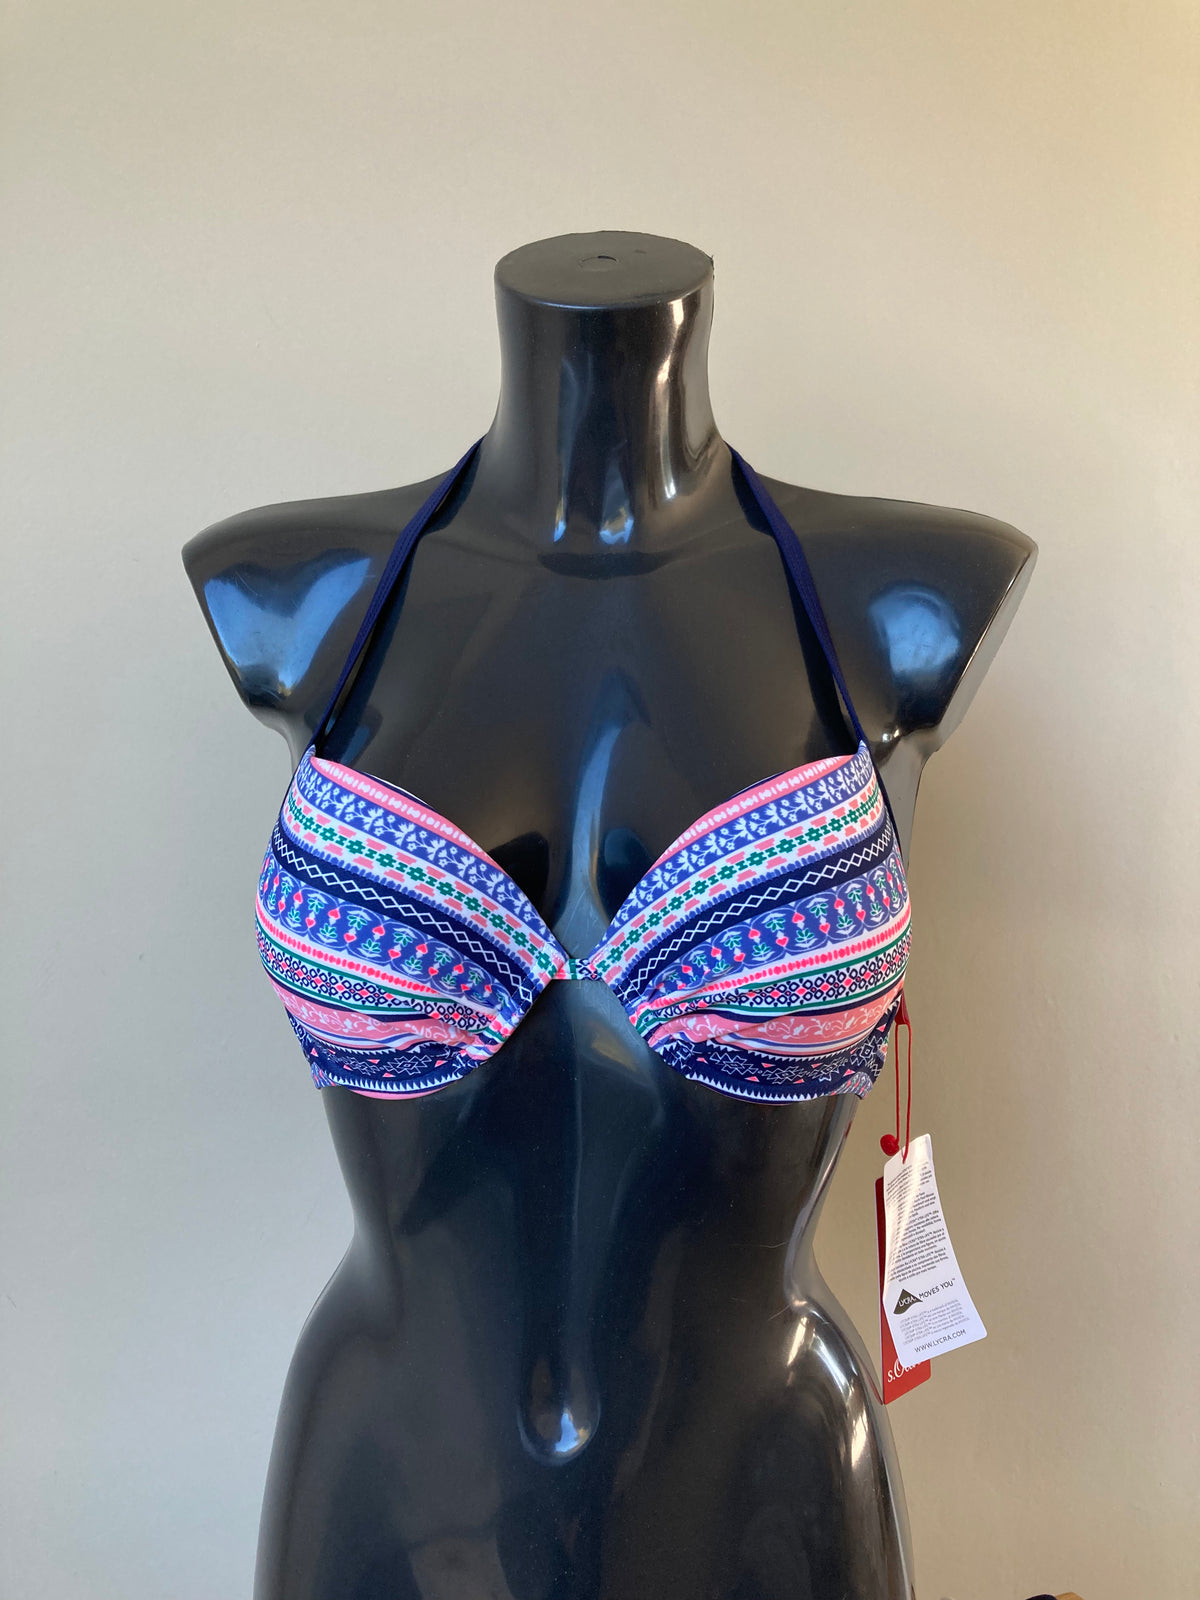 Blue Rose Push Up Bikini Top by S.OLIVER - Size 12B